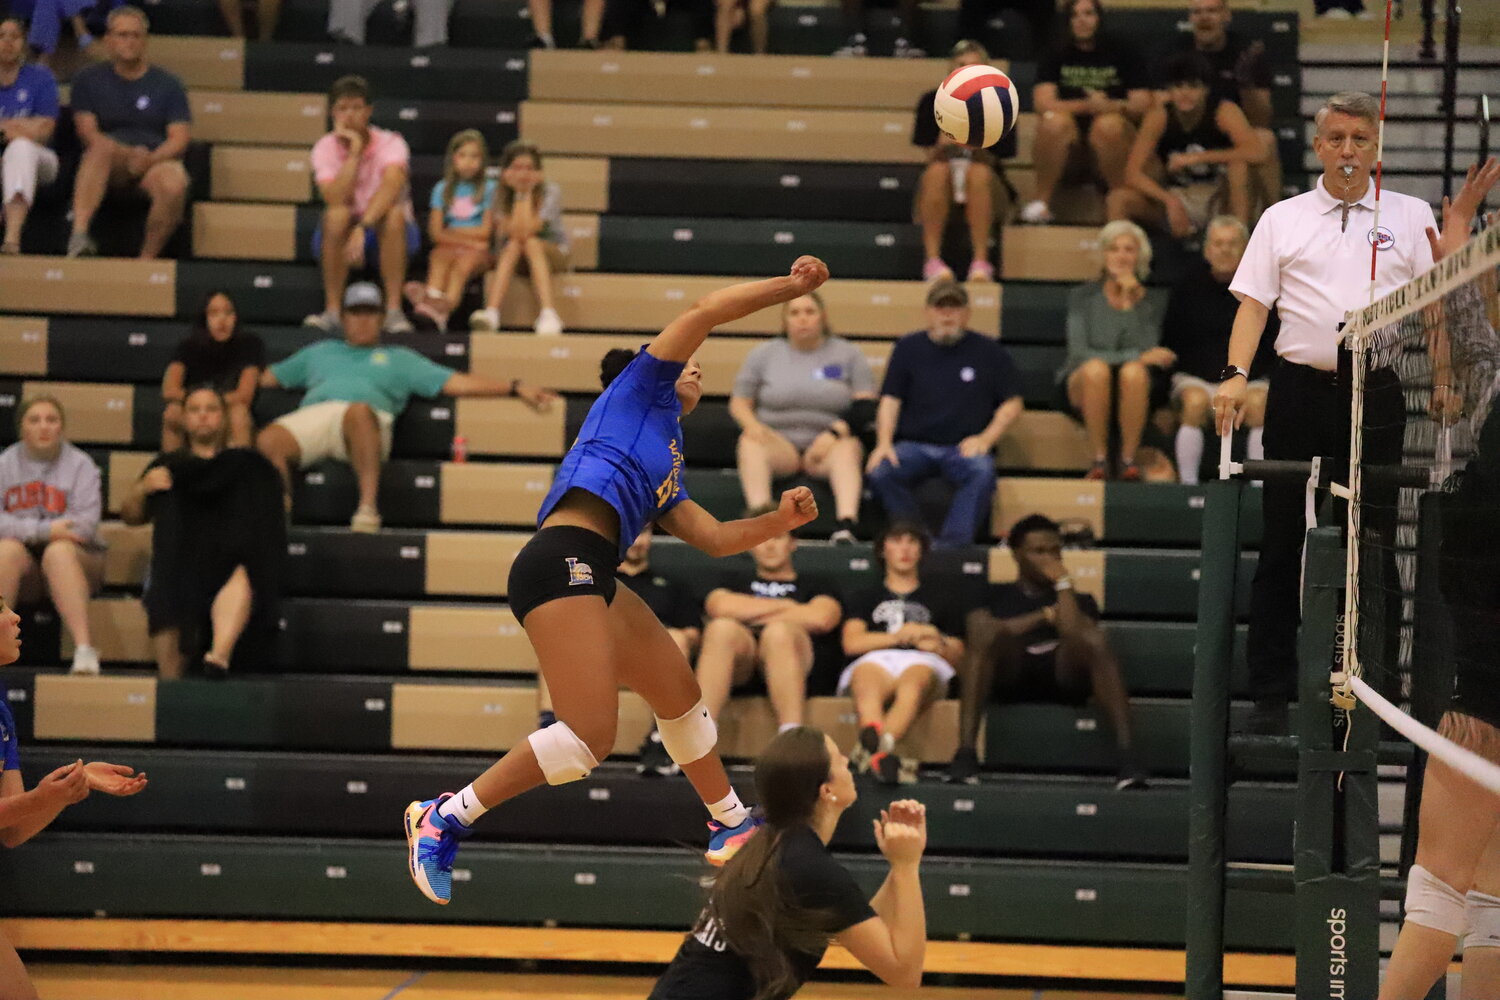 Lexington’s Jasia Brunson connects on a ball during their big win over River Bluff.